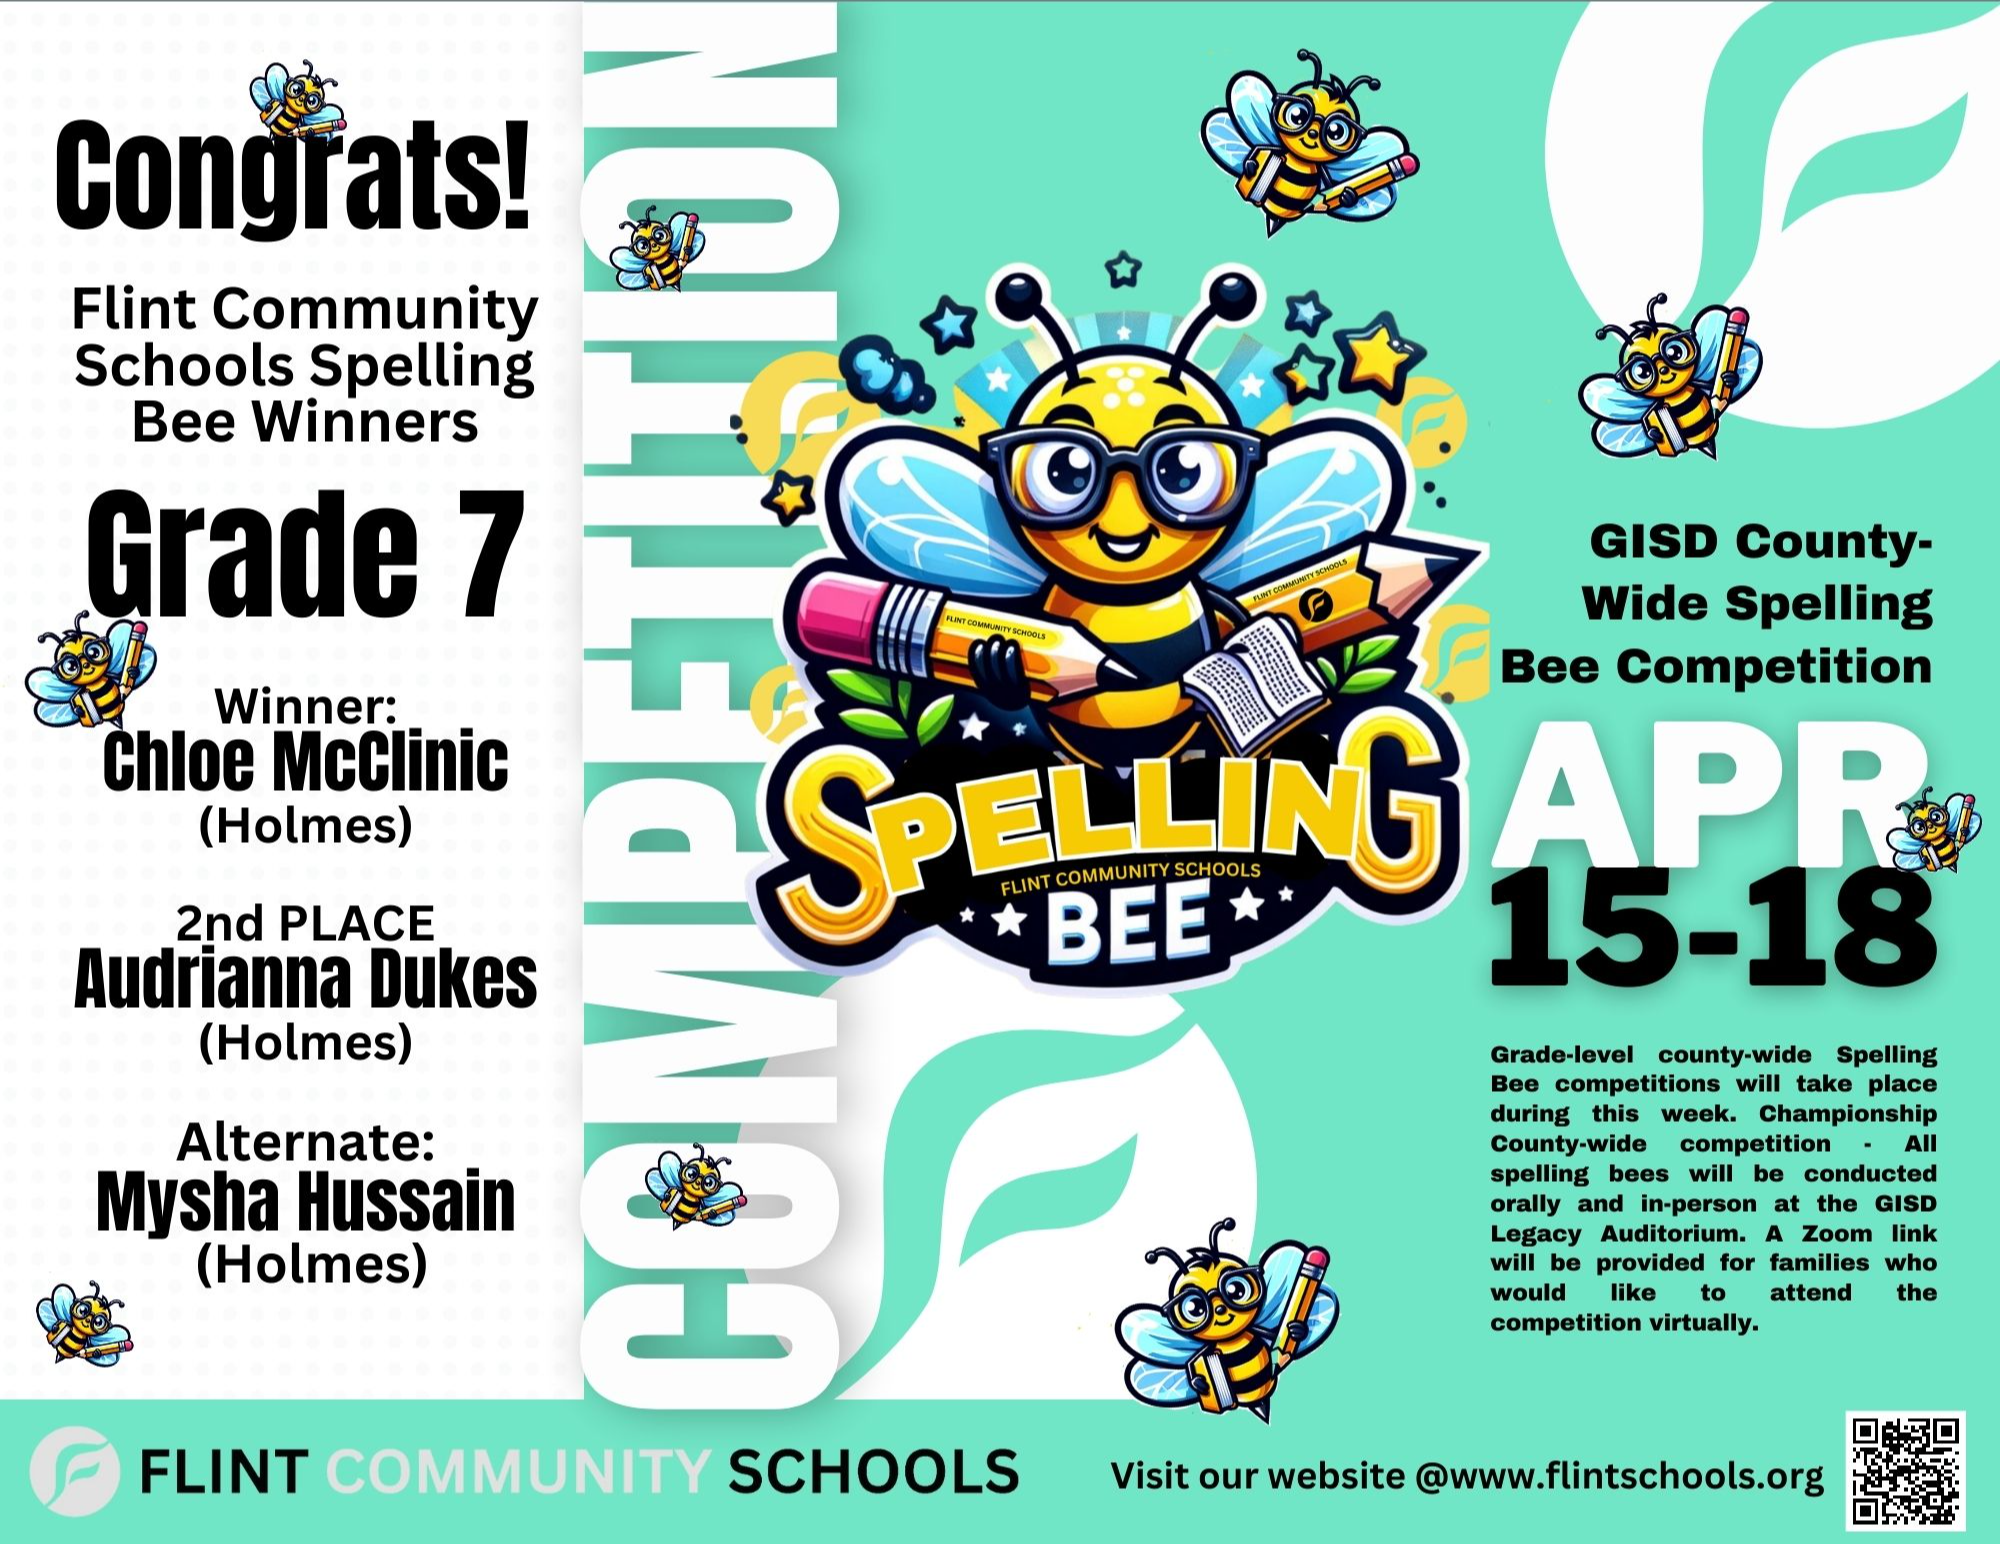 Congratulations to all our Flint Community Schools Spelling Bee Winners! 🐝 Wishing you the best of luck as you represent our district at the GISD competitions. Keep spelling those words with confidence and determination! 📚✨ #SpellingBee #FlintSchools #GoodLuck